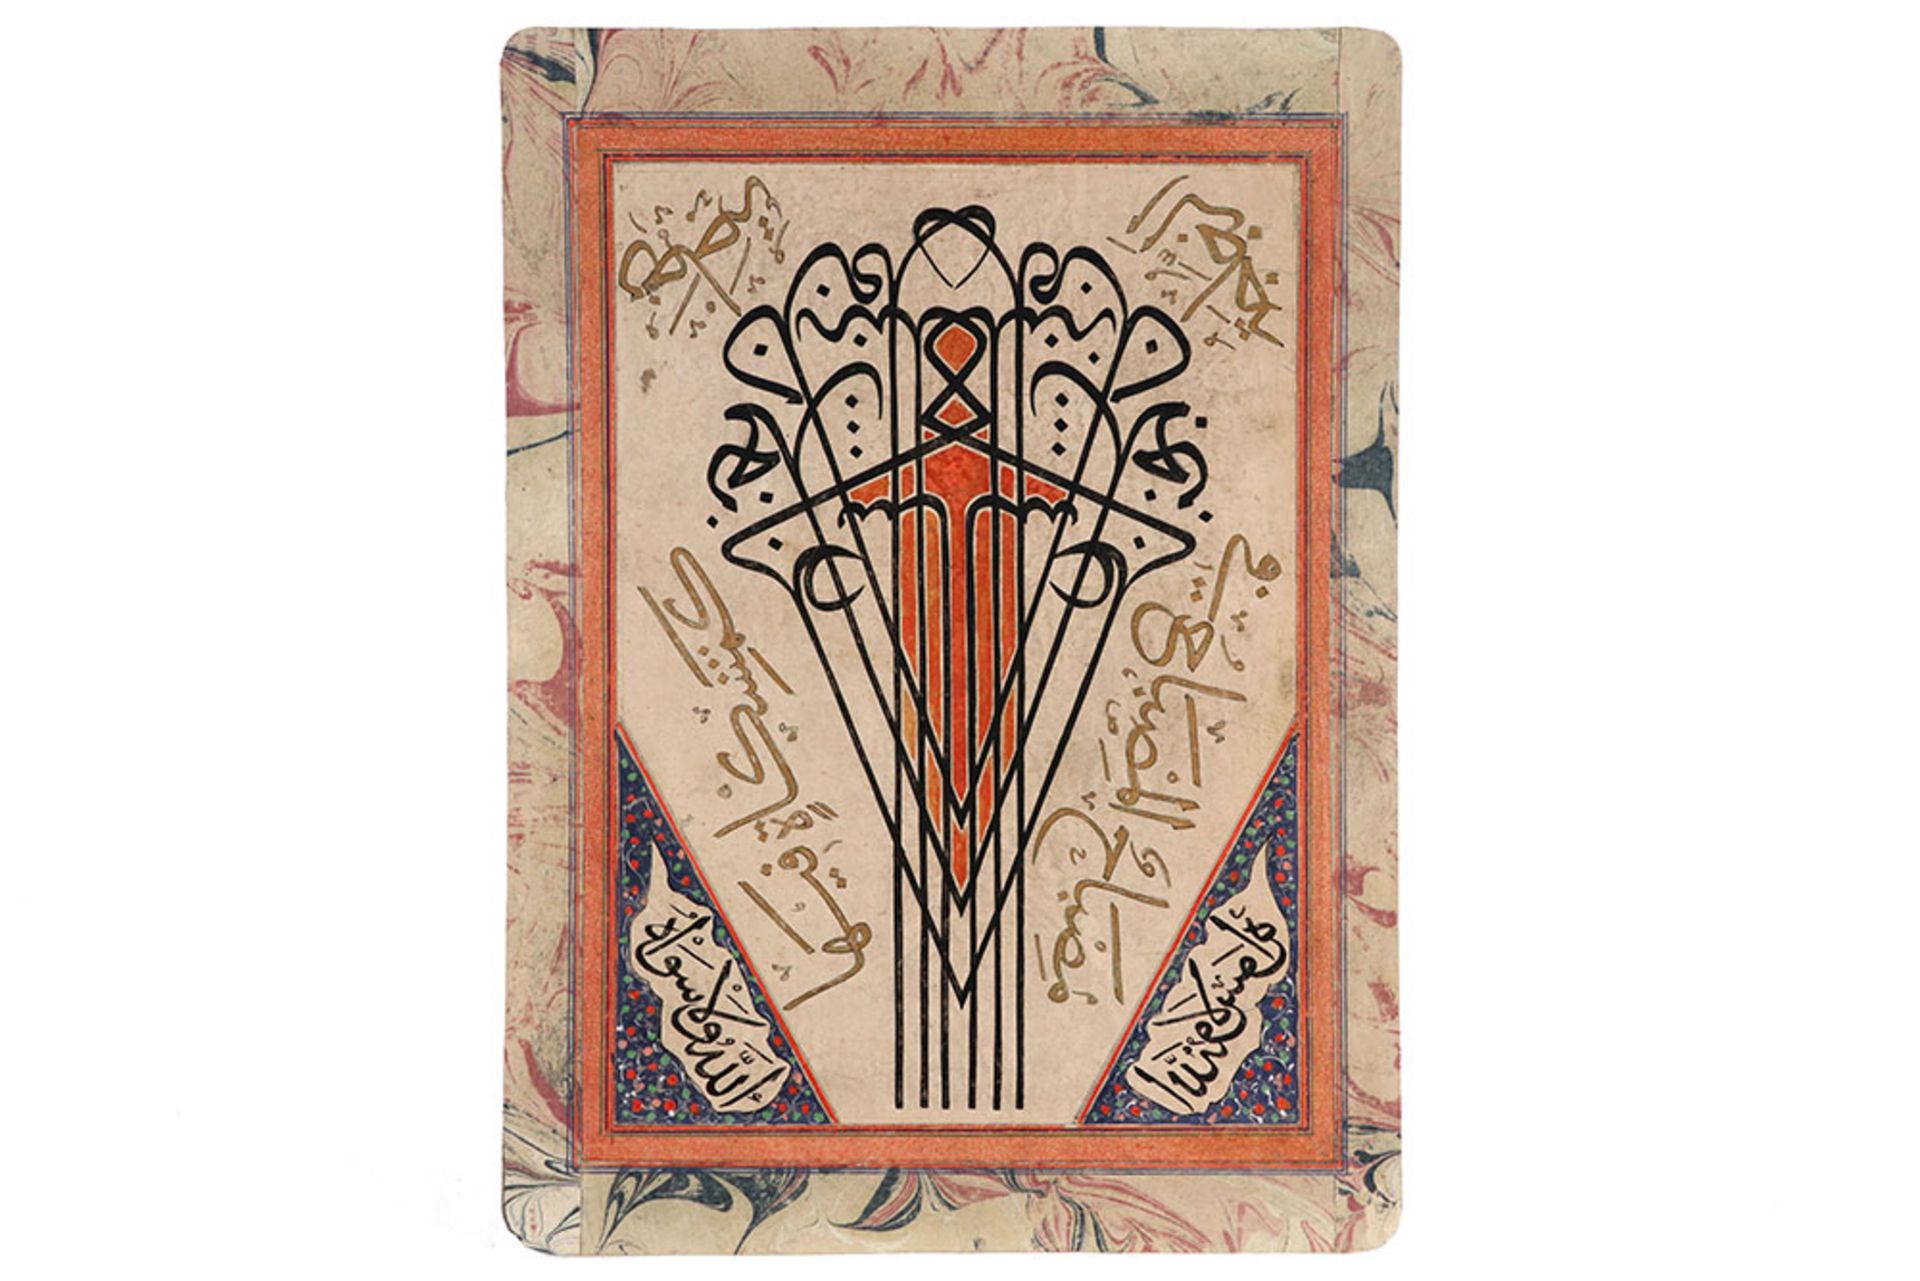 19th Cent. Ottoman Quatrain in ink and gouache on paper, depicting verse 35 of Sura Al-Nur in "